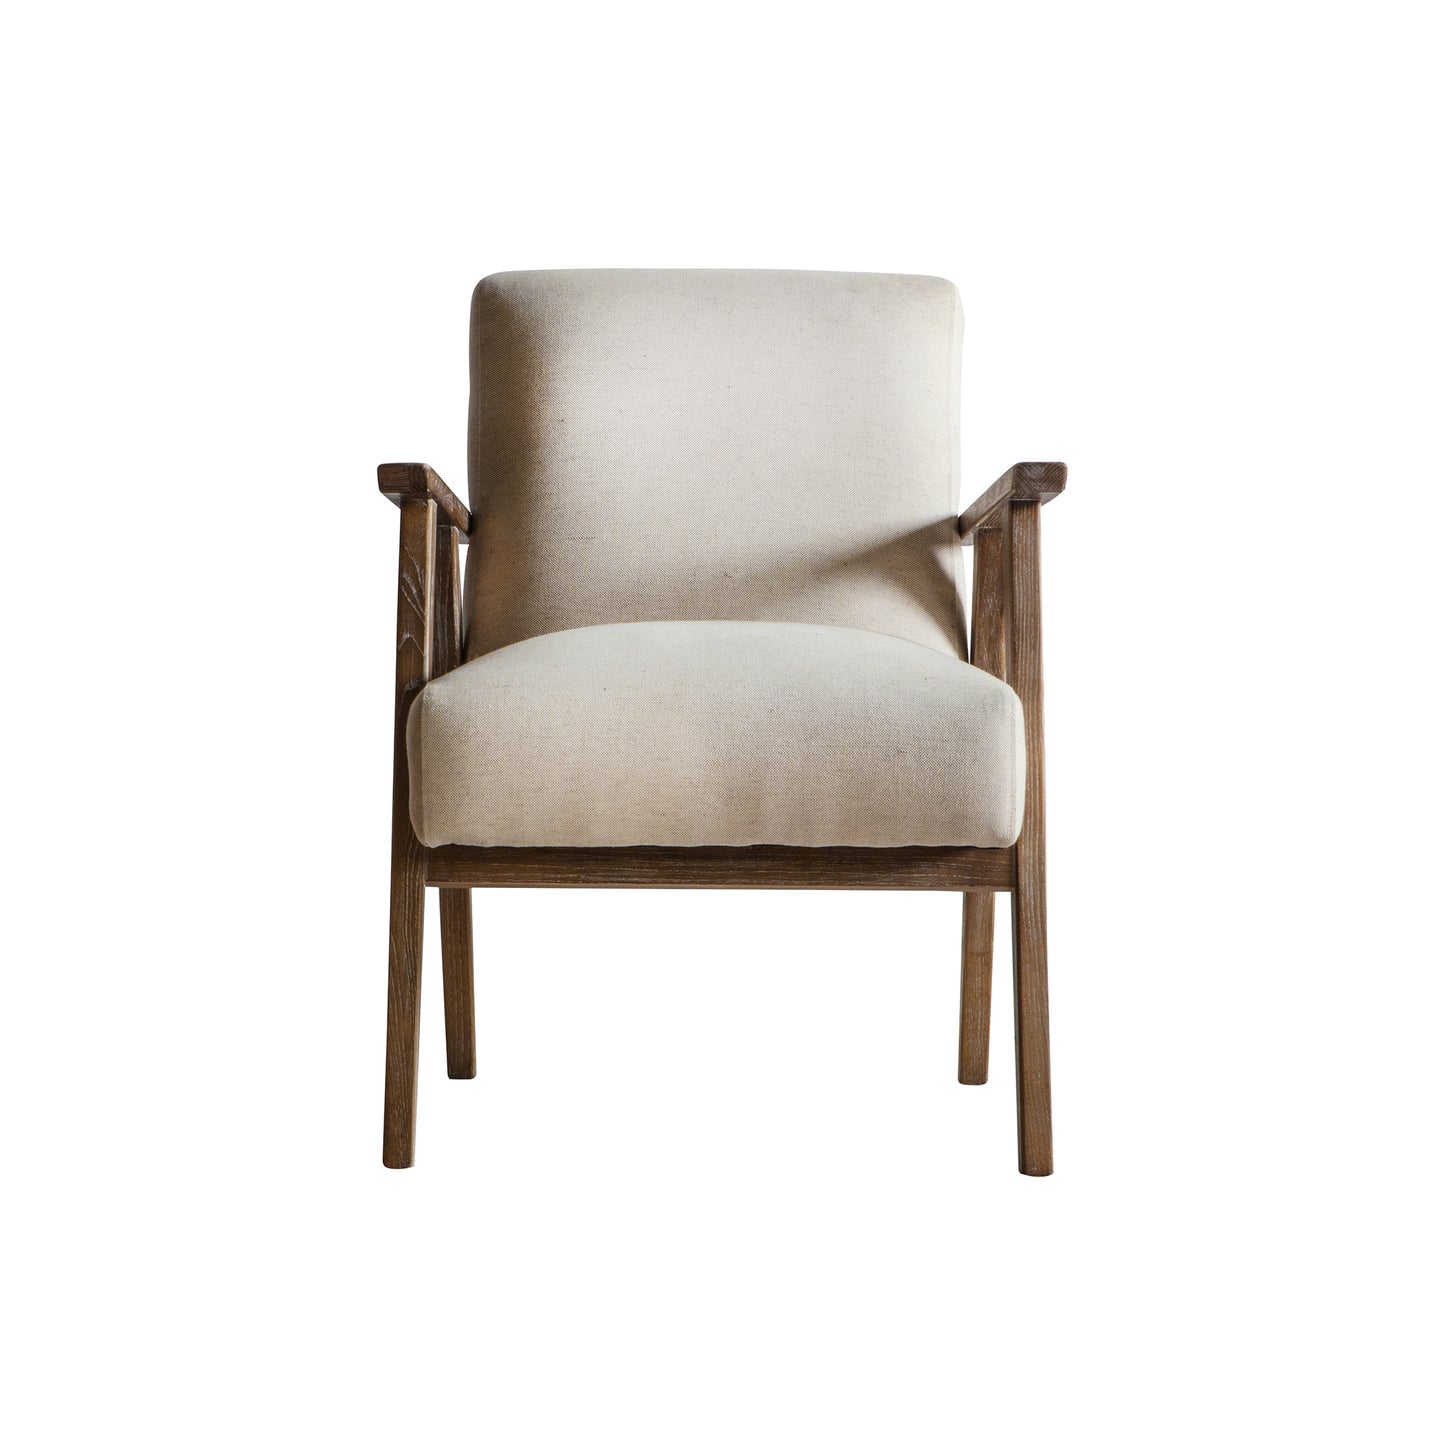 A Neyland Armchair by Kikiathome.co.uk featuring beige upholstered seat for interior decor.